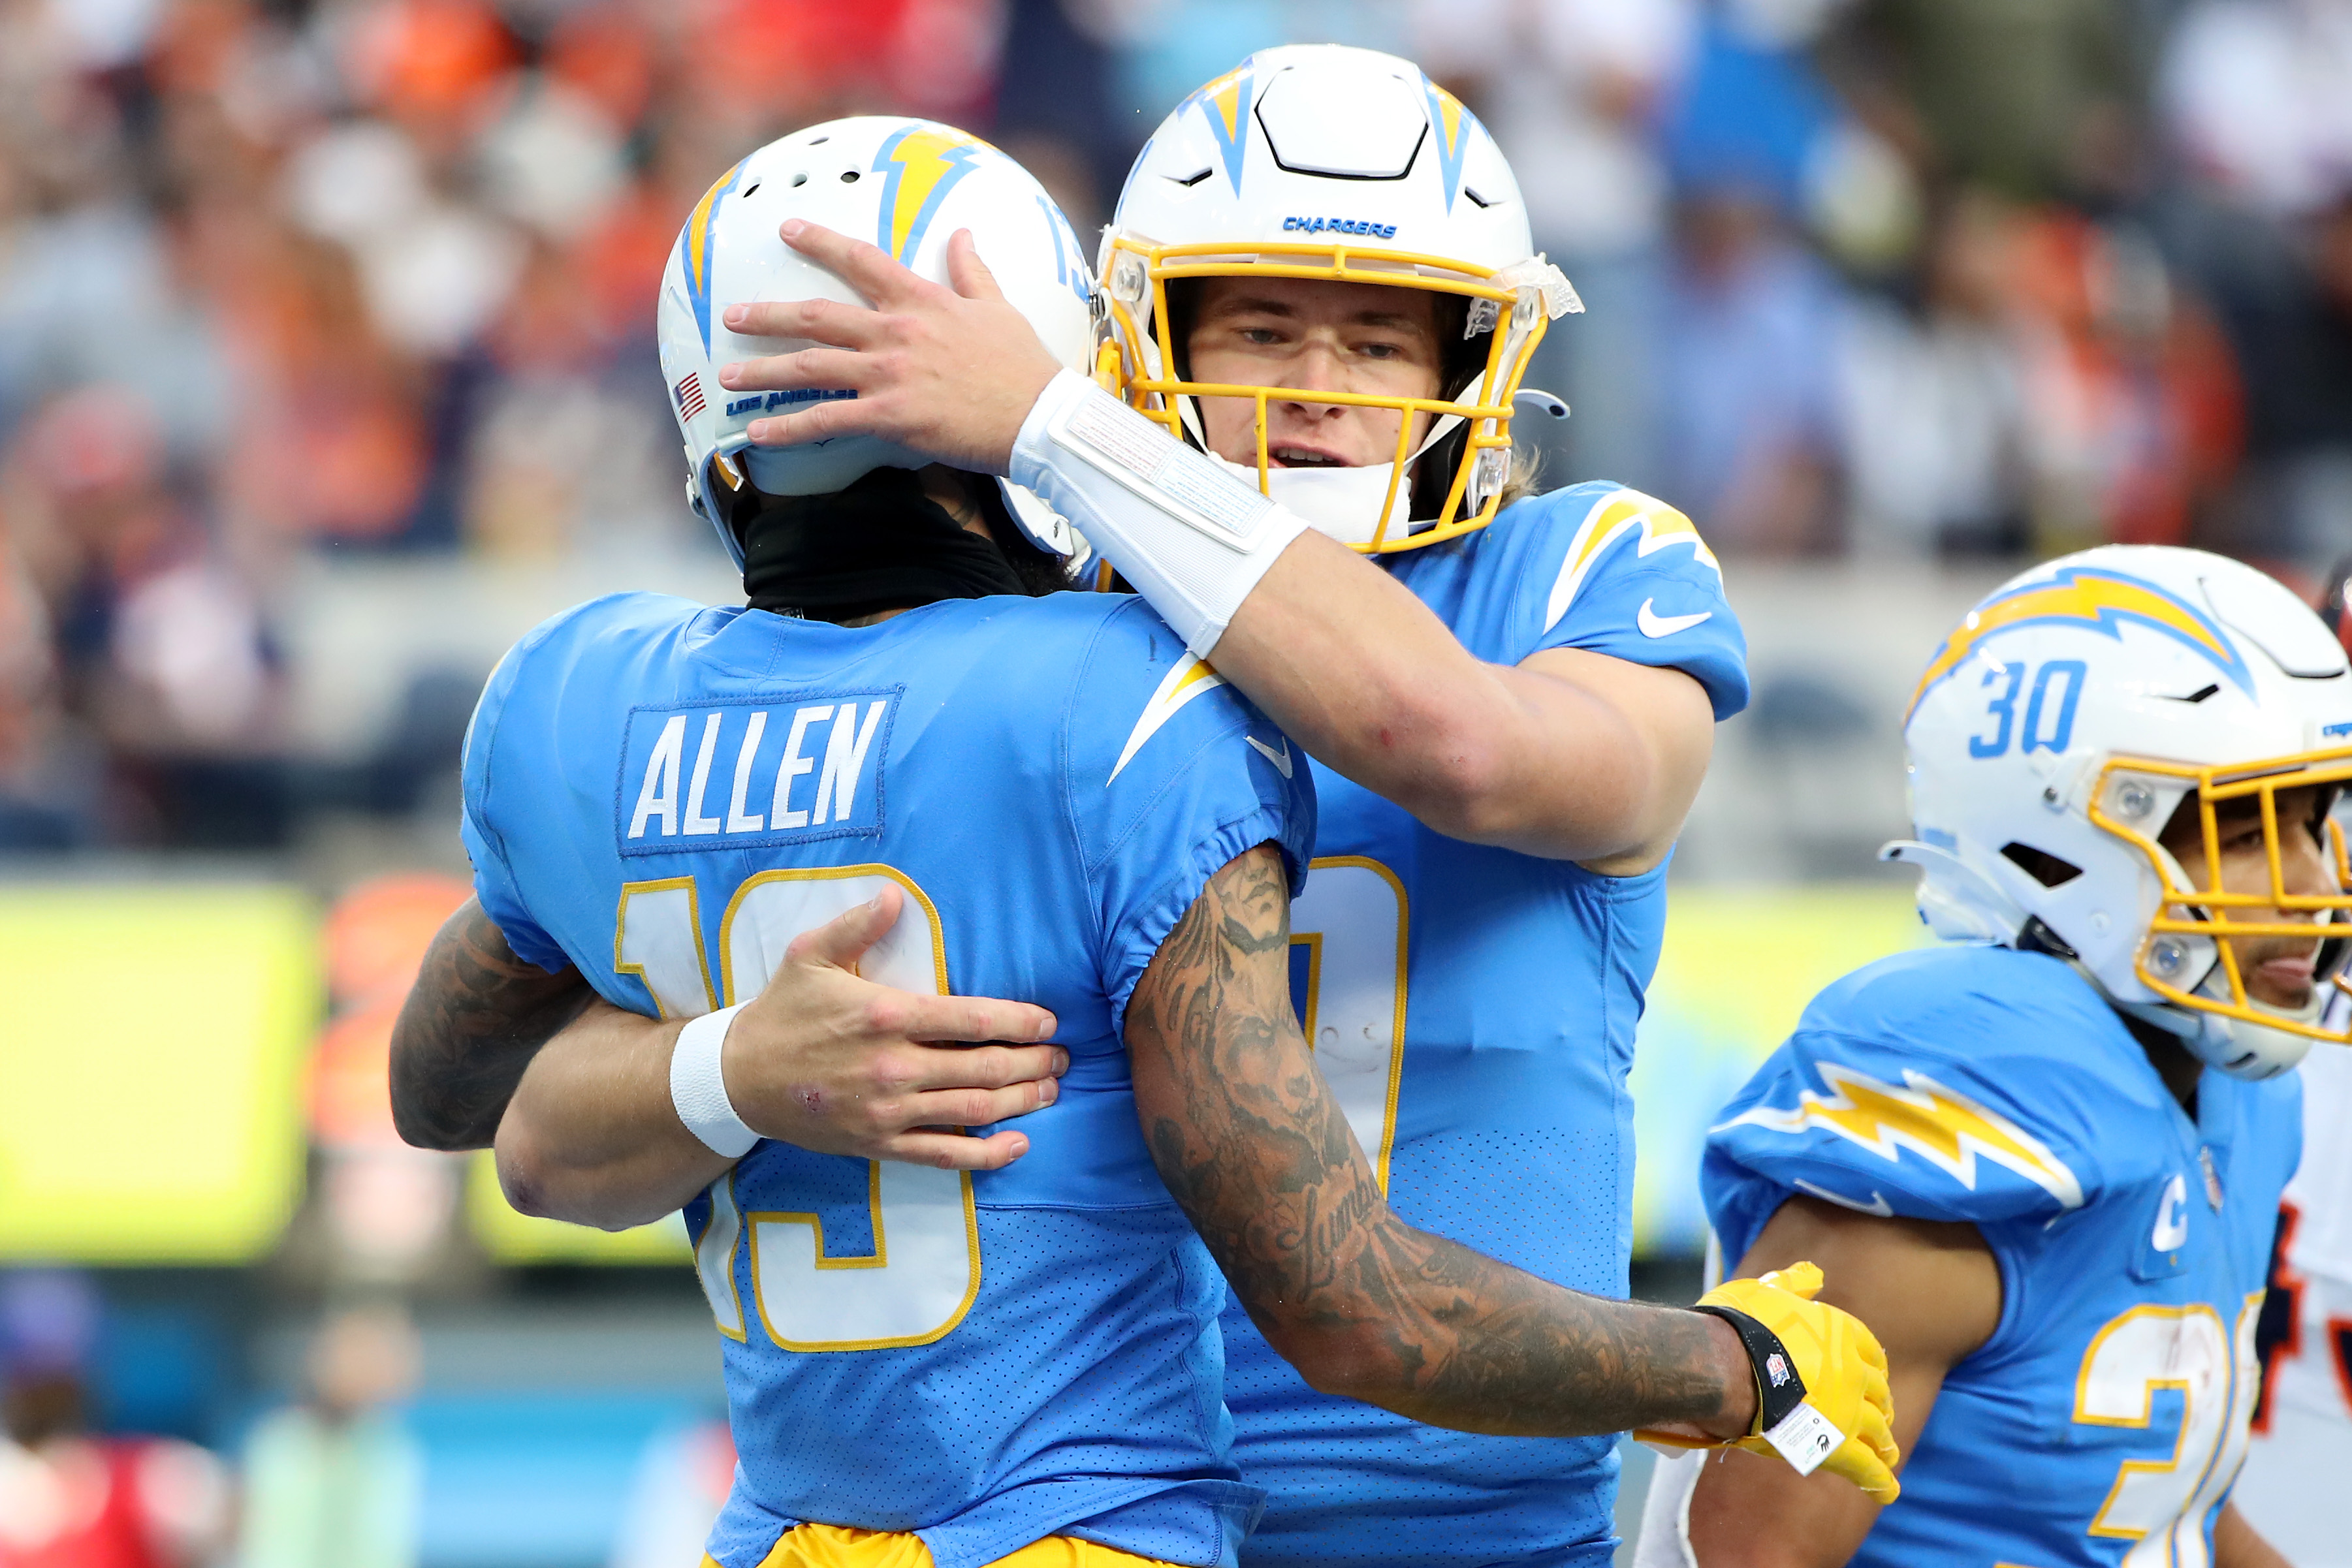 Chargers Playoffs Schedule 2022: List of Games, Opponents, TV